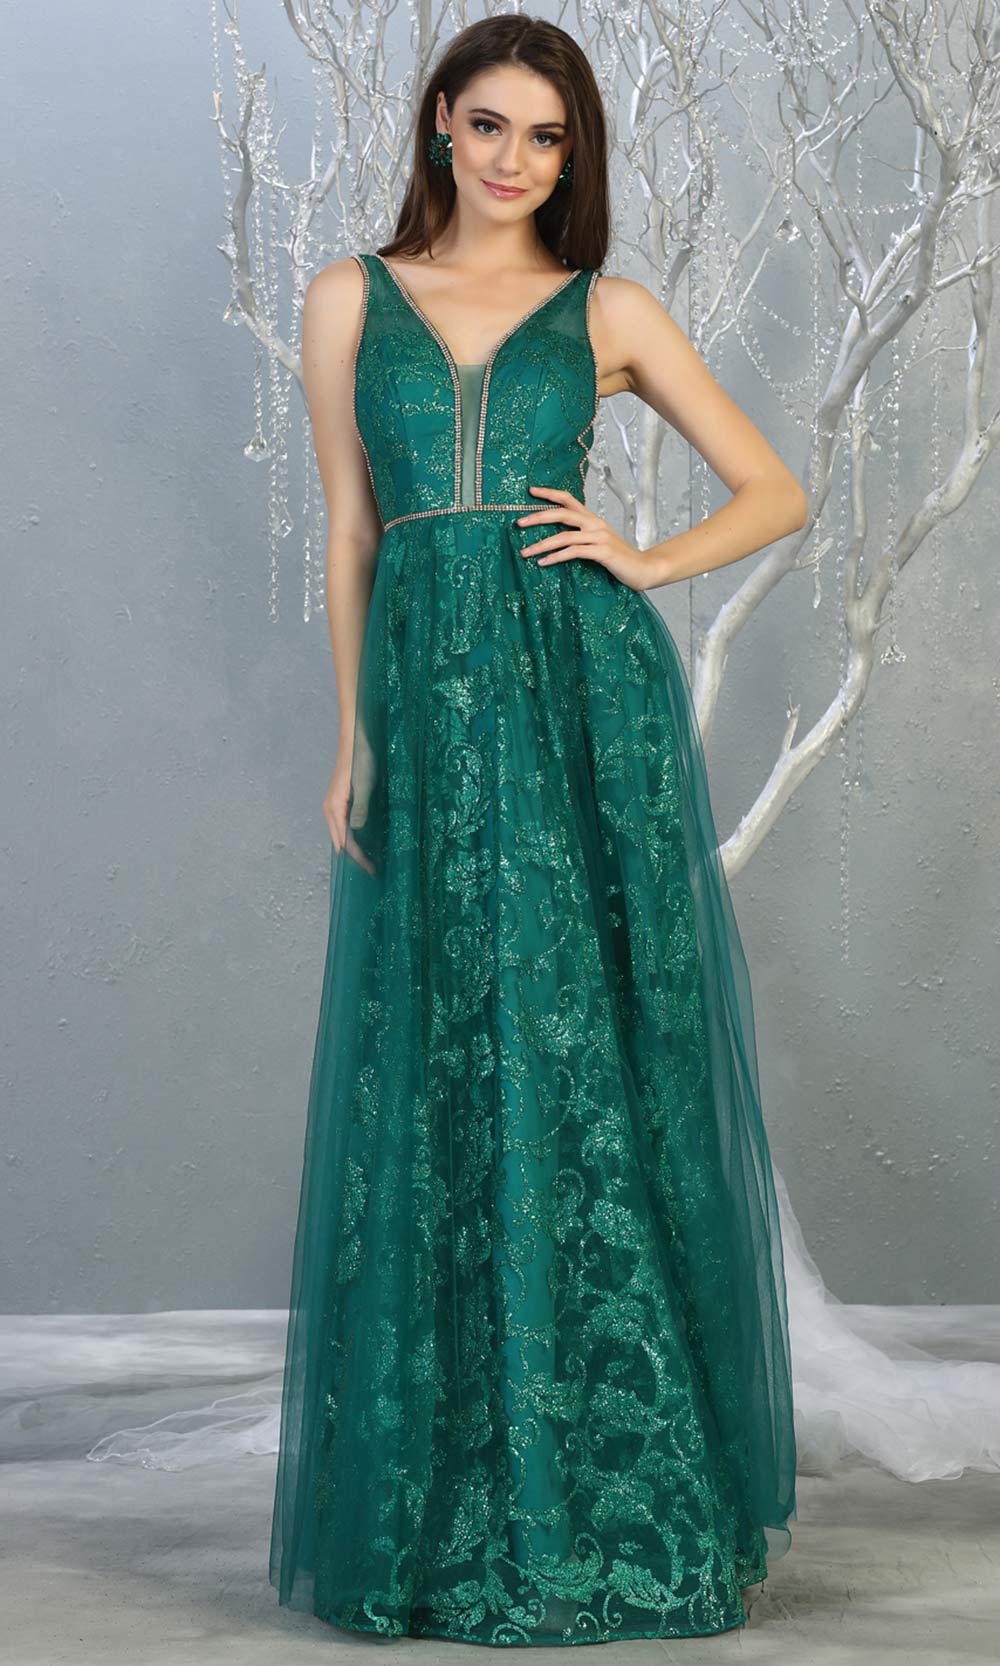 Mayqueen RQ7769 long jade green v neck flowy tulle skirt dress w/wide straps. Perfect for prom, engagement dress, e-shoot dress, formal wedding guest dress, debut, quinceanera, sweet 16, gala. Plus sizes avail in this dark green semi ballgown.jpg